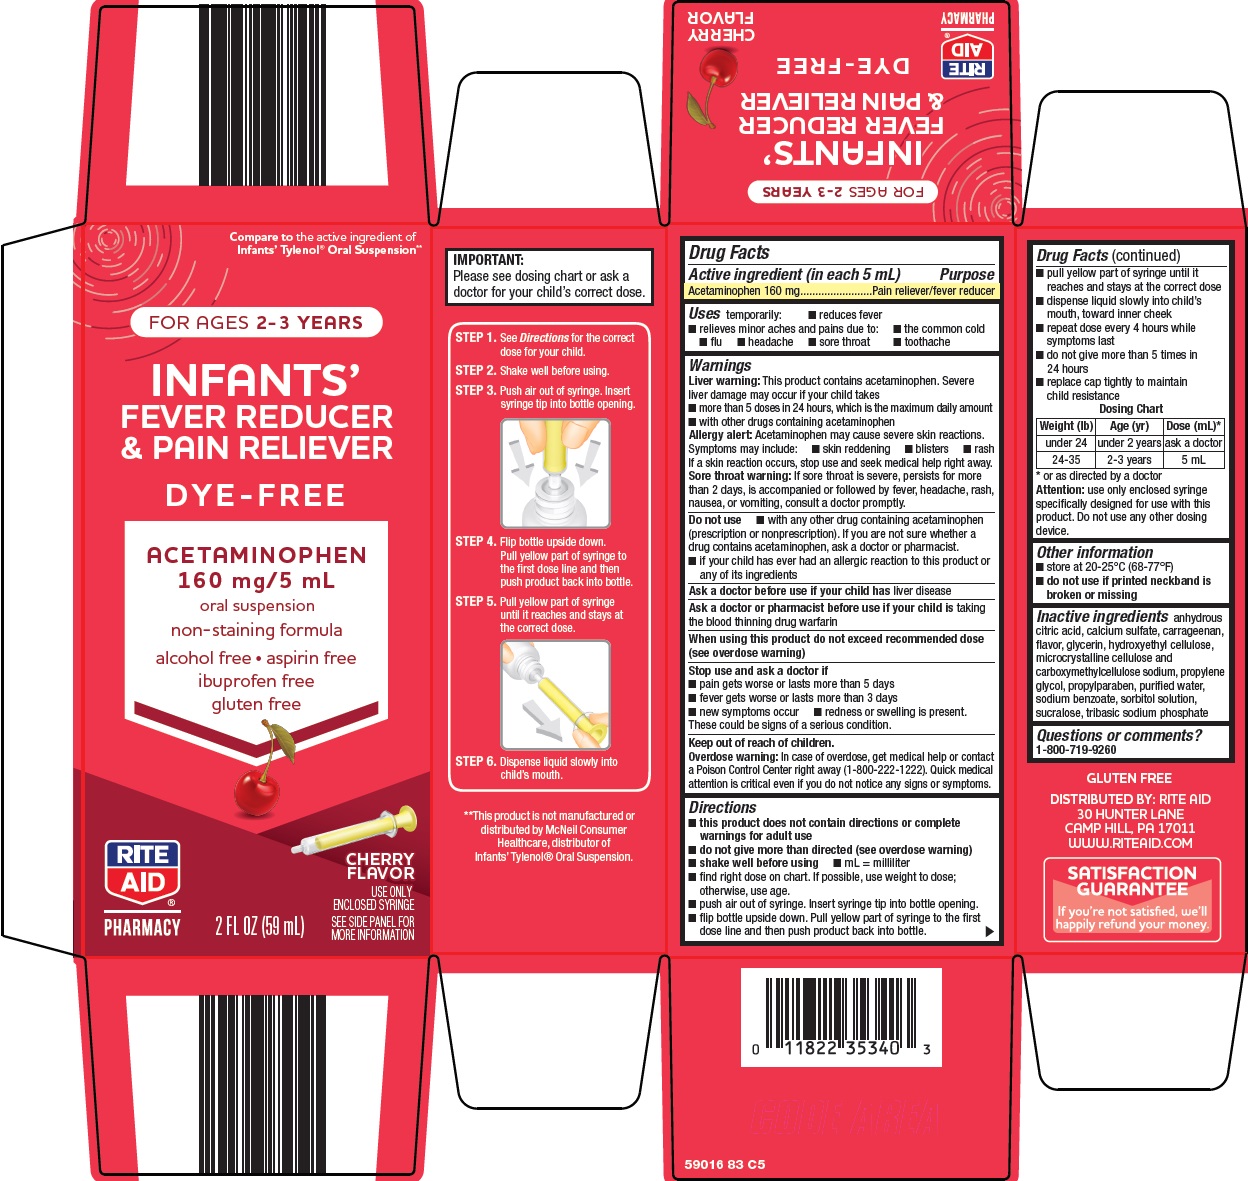 590-83-infants-fever-reducer-and-pain-reliever.jpg